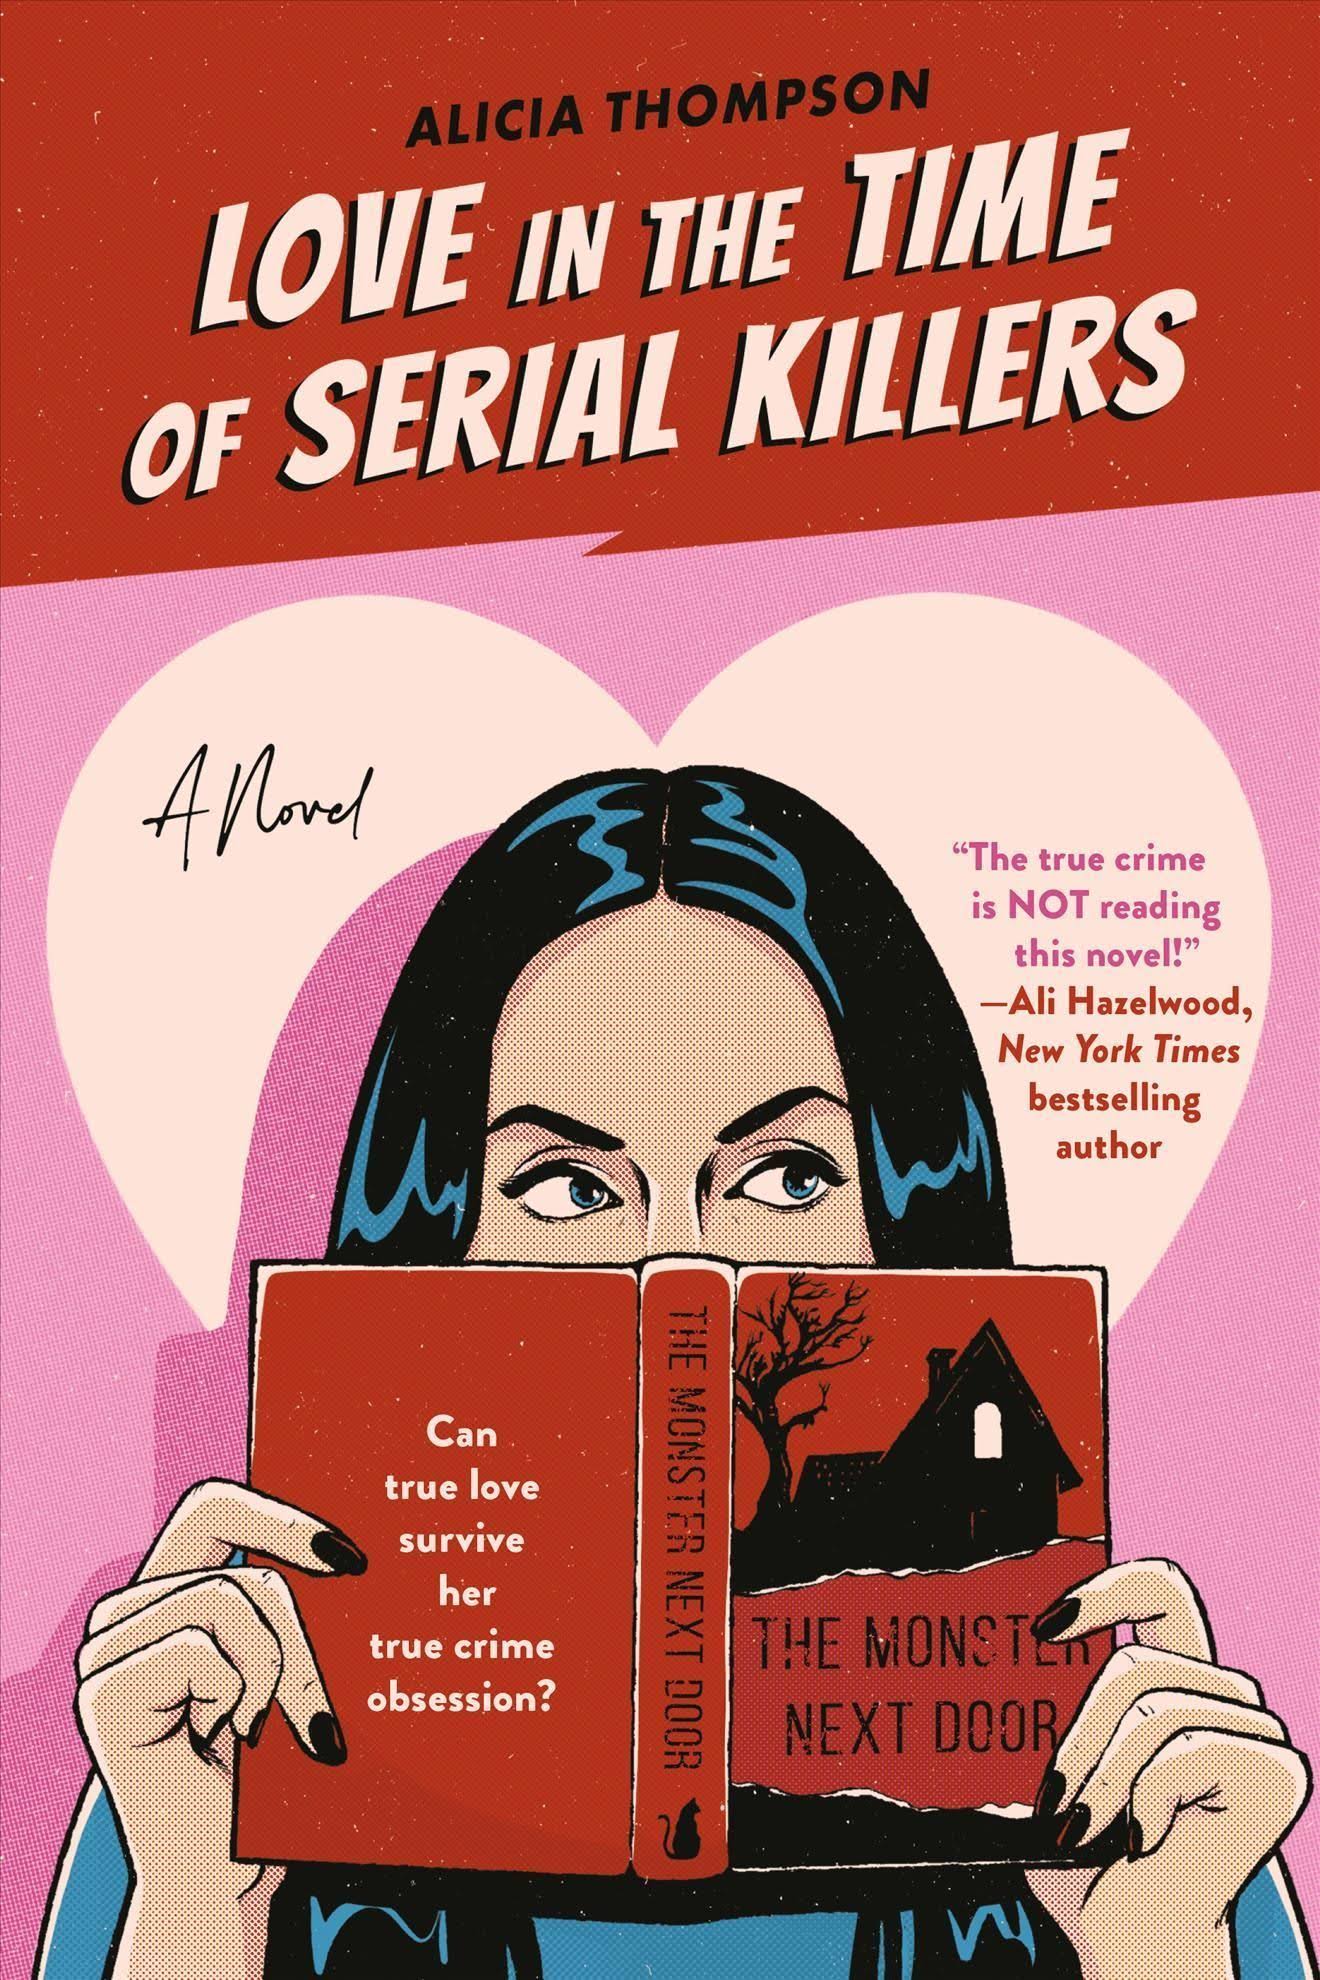 Love in The Time of Serial Killers by Alicia Thompson